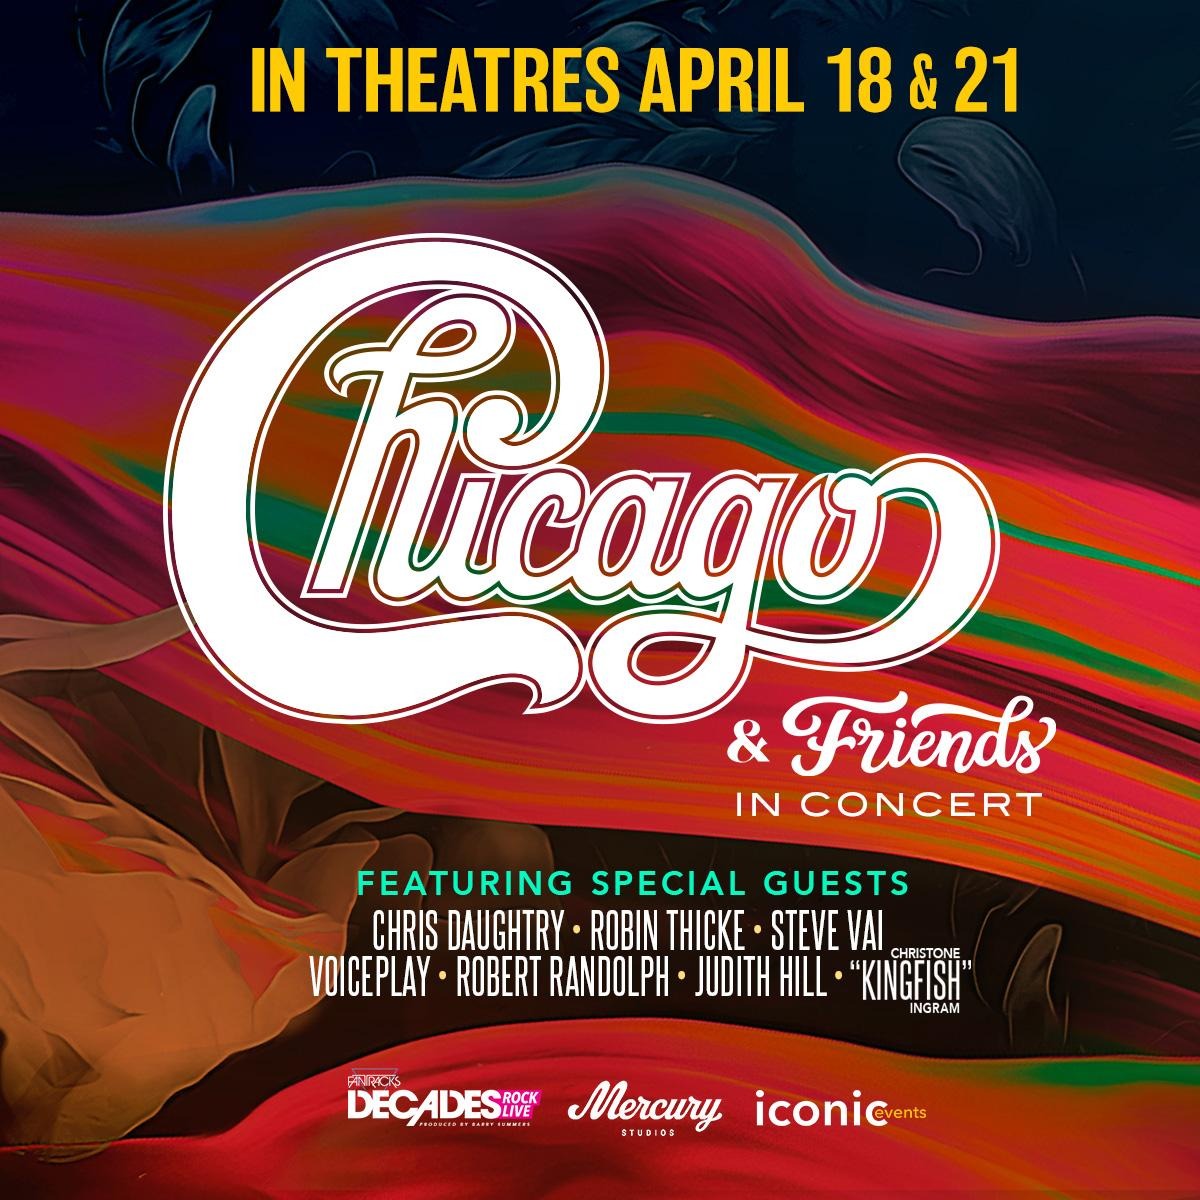 NOW SHOWING! Chicago & Friends In Concert – out today in theatres across the US! Tickets and theatre locations @ chicagoandfriendsintheatres.com The film features the band's greatest hits and celebrates the 55th Anniversary of their debut album, CHICAGO TRANSIT AUTHORITY. Chicago is